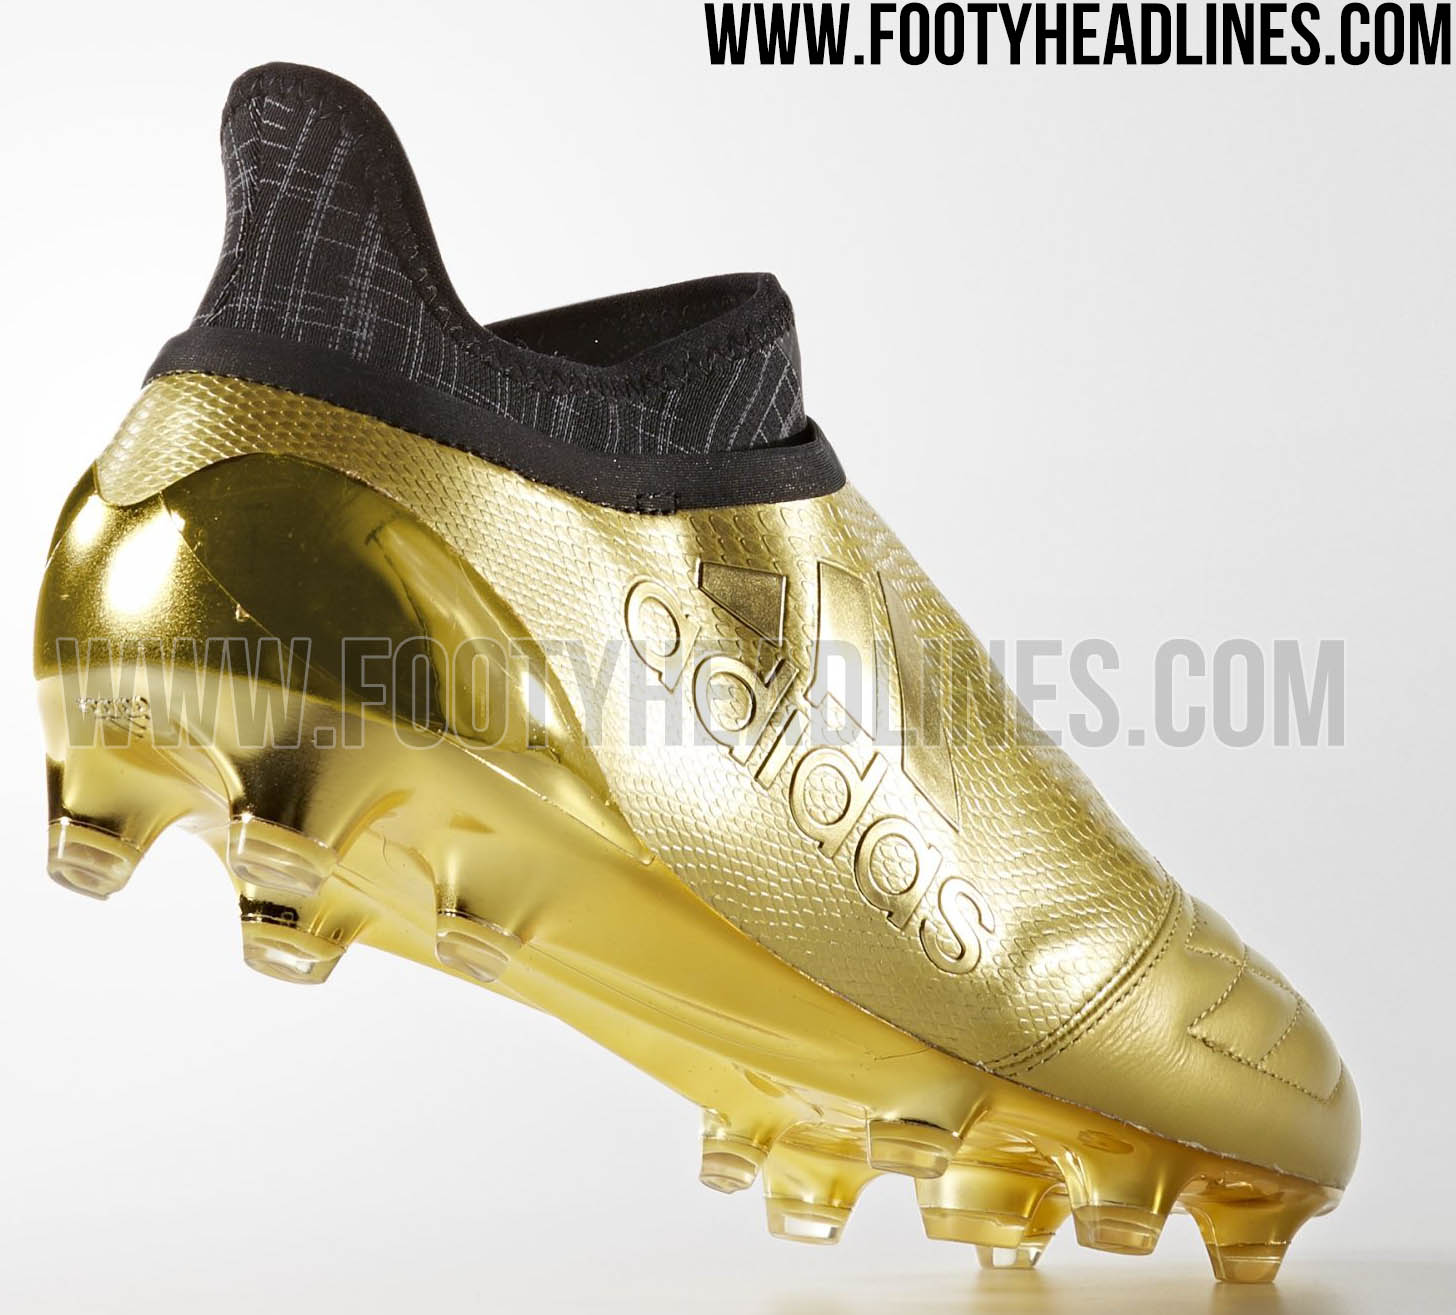 Gold Adidas X 16+ Space Pack Released - Footy Headlines